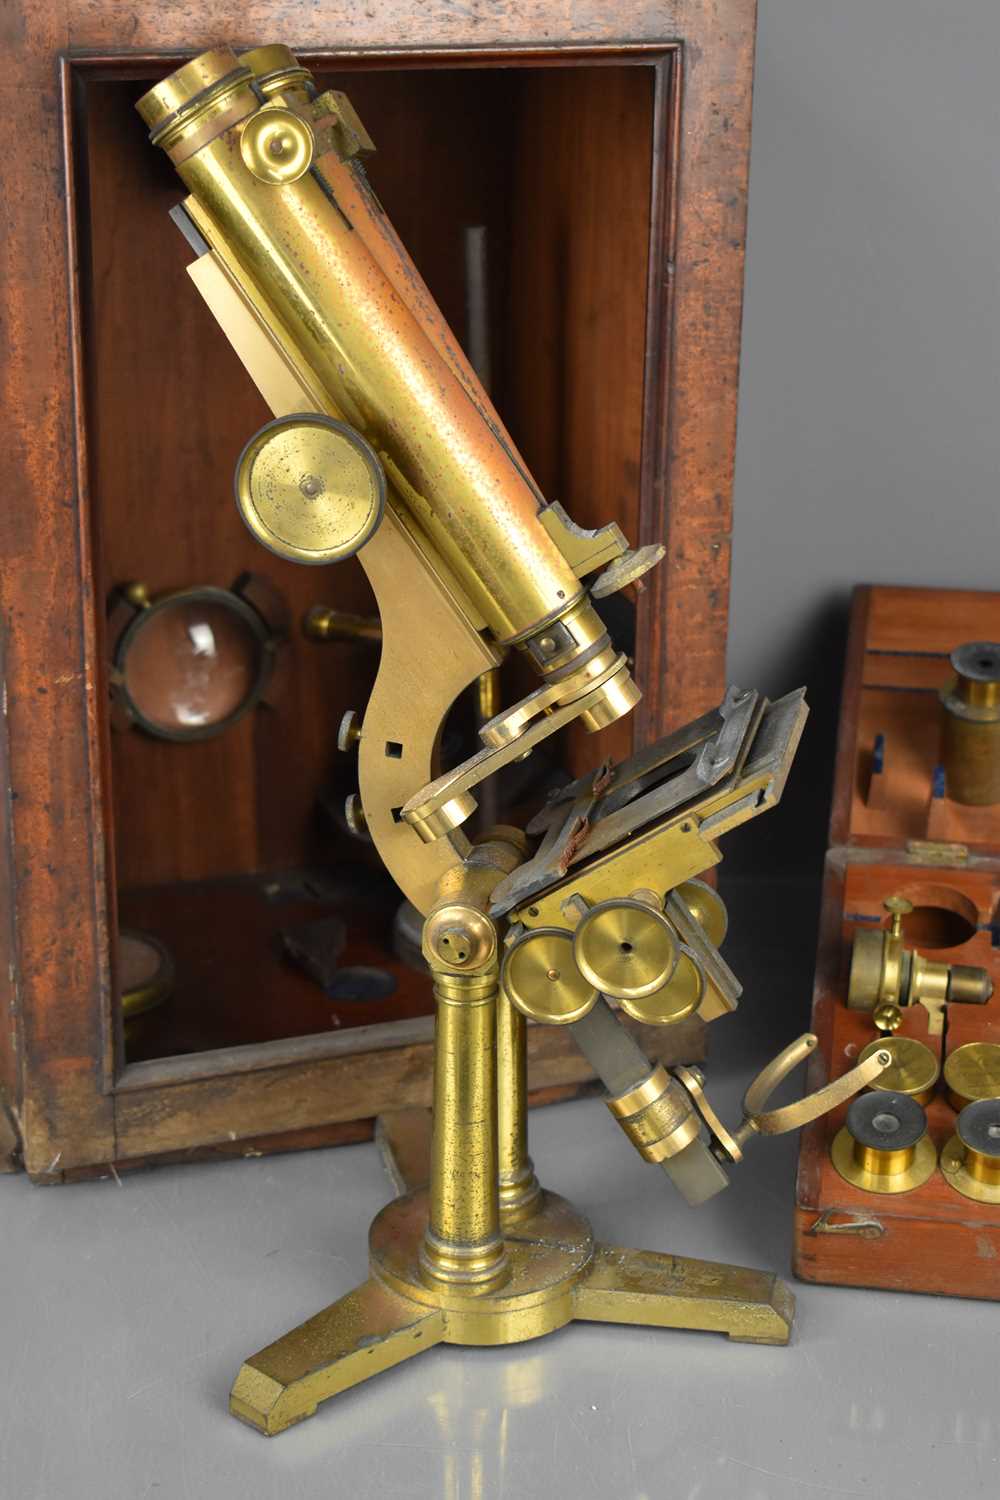 A 19th century Smith & Beck binocular Microscope in a mahogany case, the case holding a large - Bild 3 aus 4